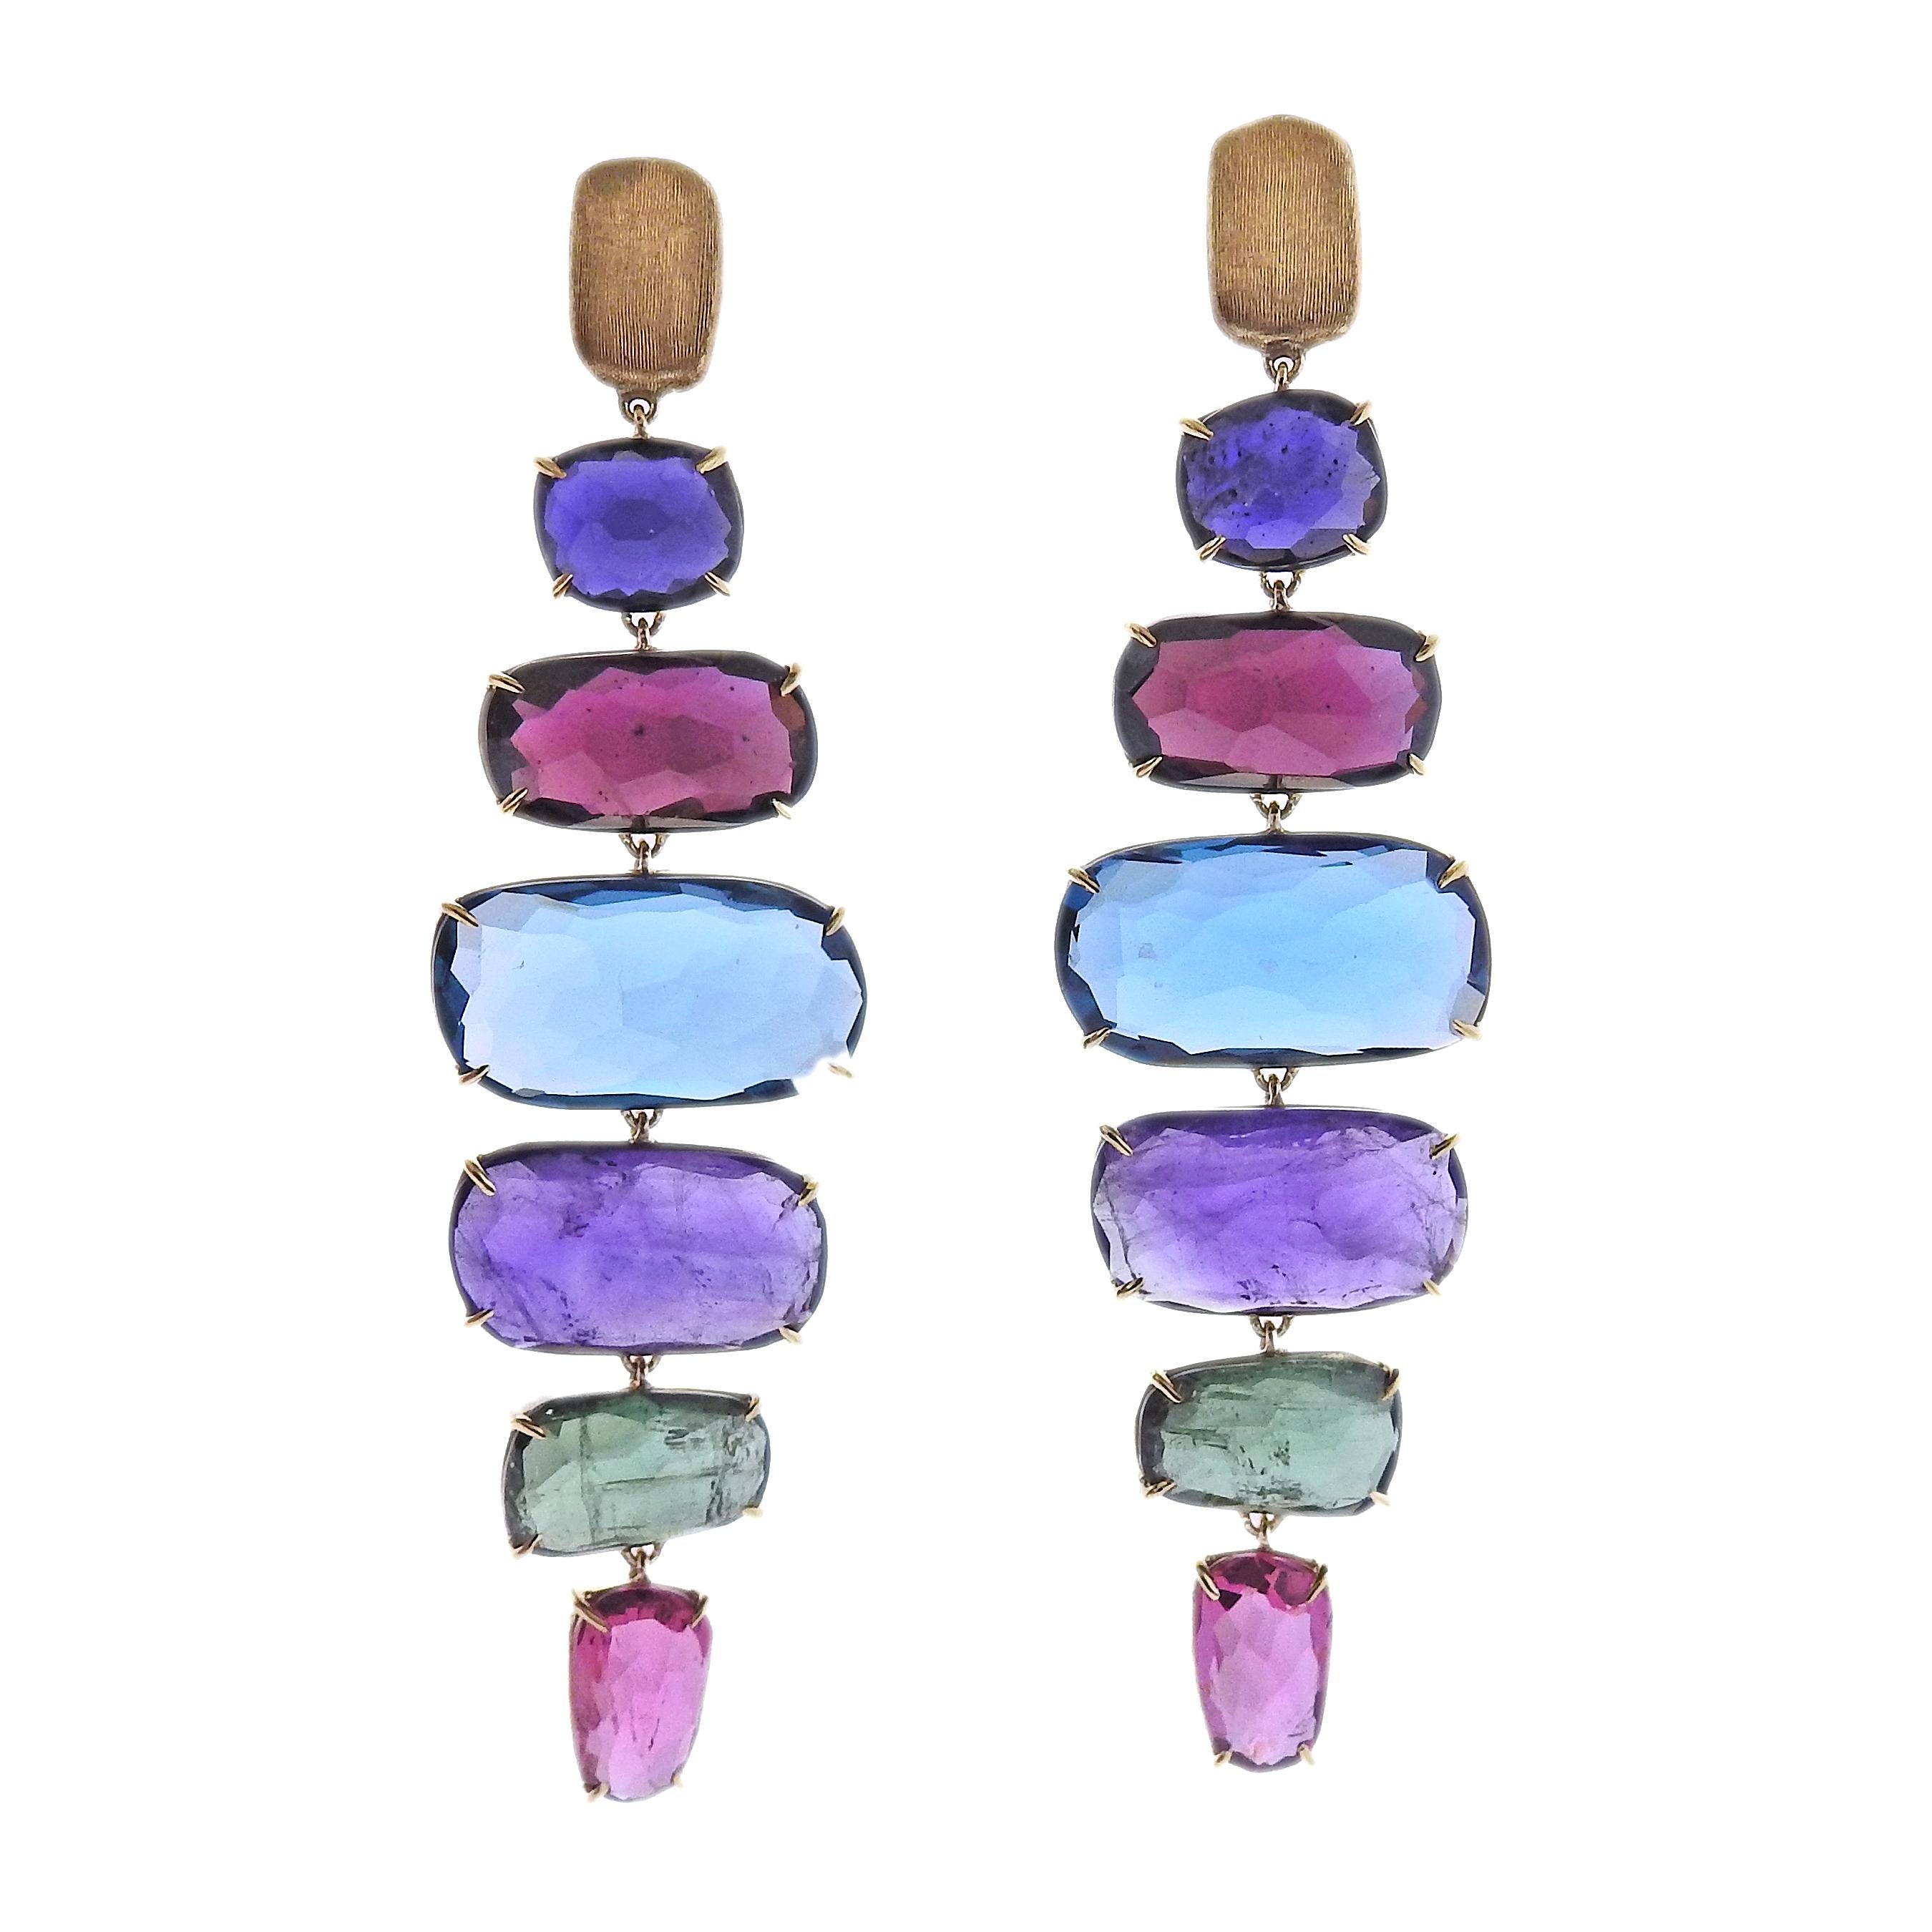 Marco Bicego Murano collection 18K yellow gold long drop earrings, set with Amethyst, Iolite, Peridot, Tourmaline, Topaz gemstones. Earrings are 2 3/4